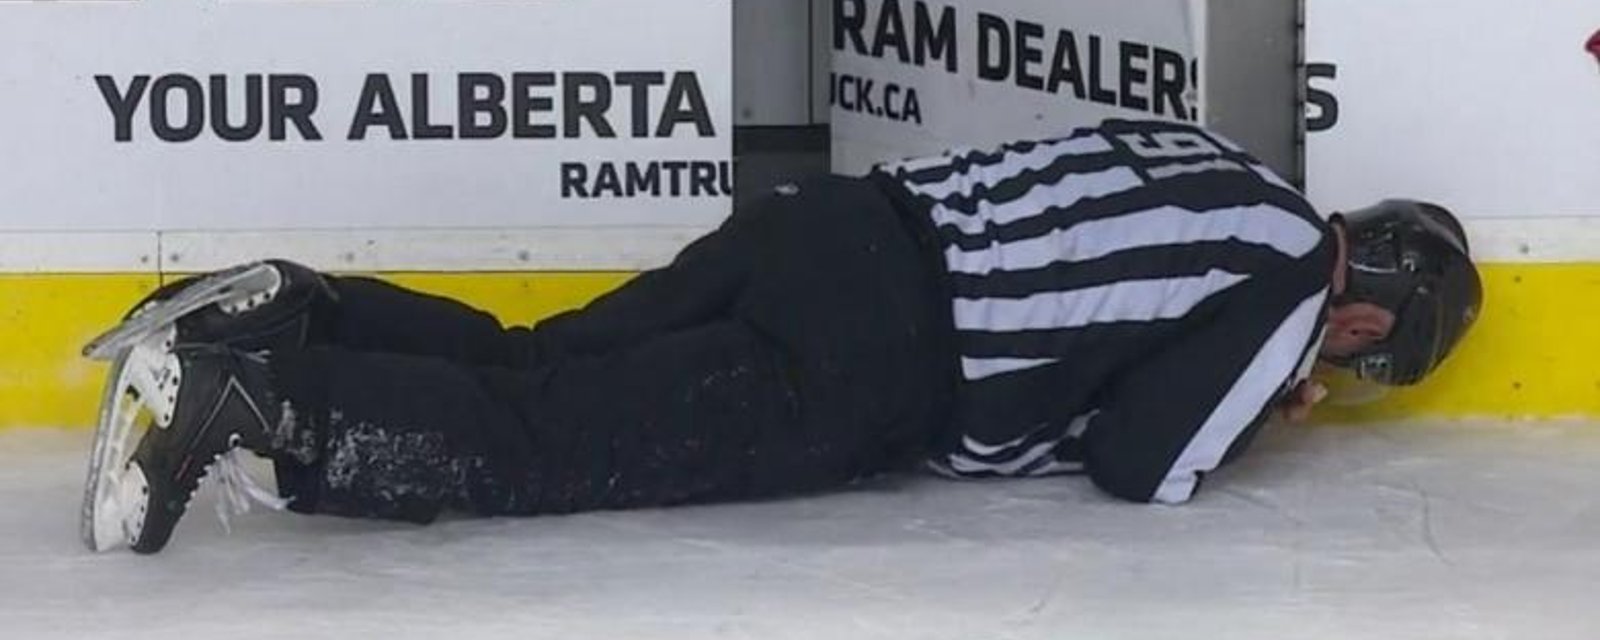 Wideman delivers a hard and deliberate looking hit to a referee.